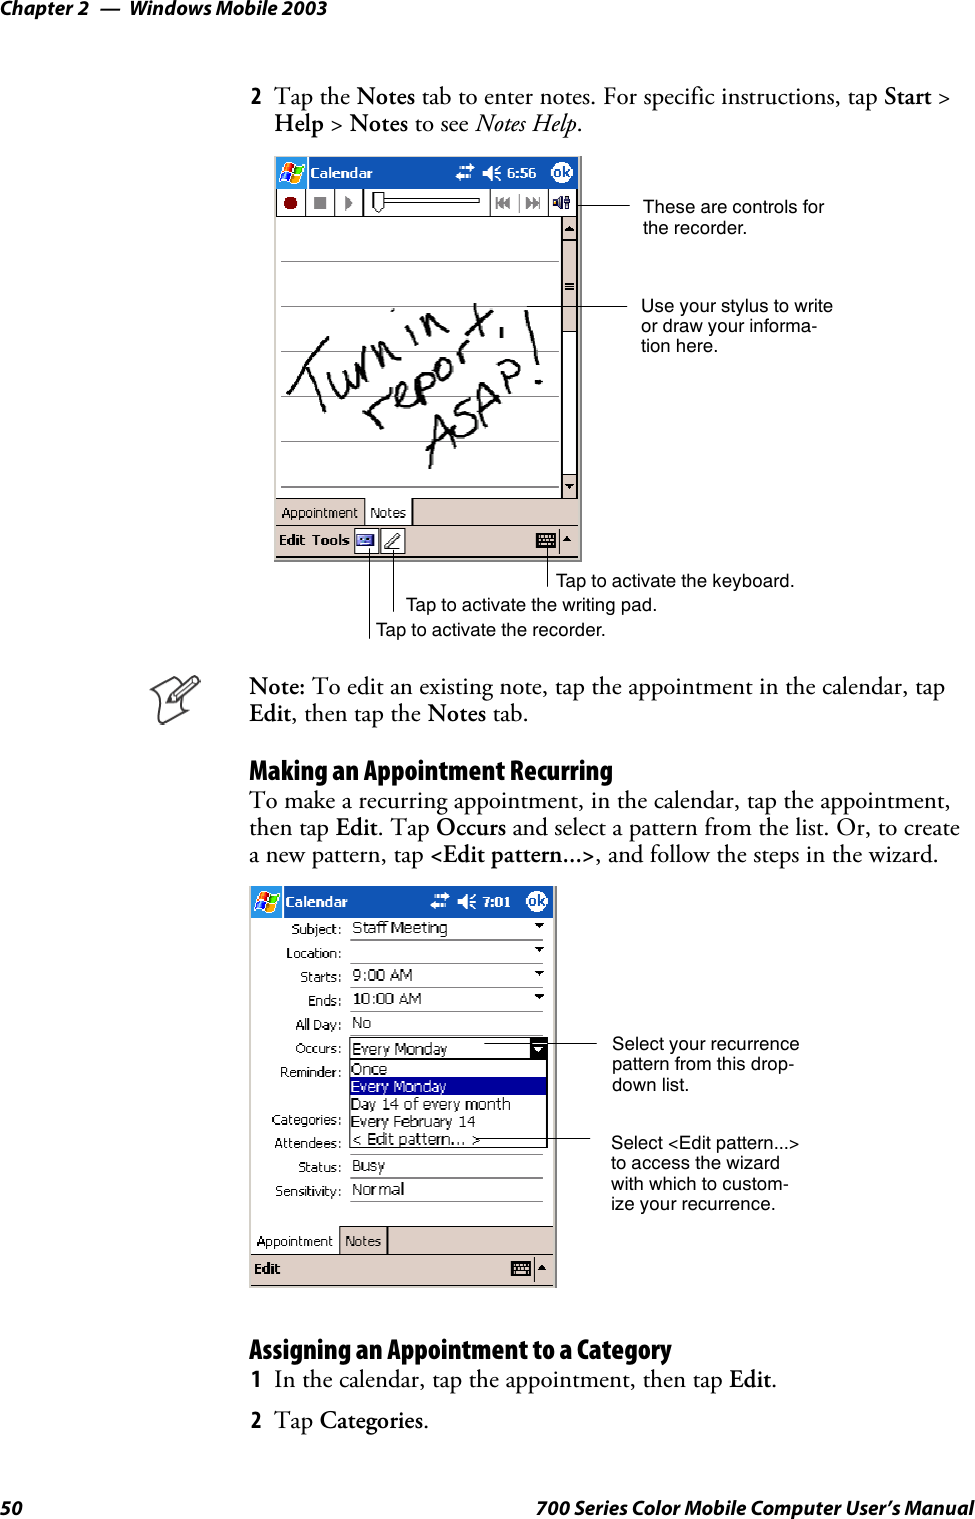 Windows Mobile 2003Chapter —250 700 Series Color Mobile Computer User’s Manual2Tap the Notes tab to enter notes. For specific instructions, tap Start &gt;Help &gt;Notes to see Notes Help.Tap to activate the writing pad.These are controls forthe recorder.Use your stylus to writeor draw your informa-tion here.Tap to activate the recorder.Tap to activate the keyboard.Note: To edit an existing note, tap the appointment in the calendar, tapEdit,thentaptheNotes tab.Making an Appointment RecurringTo make a recurring appointment, in the calendar, tap the appointment,then tap Edit.TapOccurs and select a pattern from the list. Or, to createa new pattern, tap &lt;Edit pattern...&gt;, and follow the steps in the wizard.Select your recurrencepattern from this drop-down list.Select &lt;Edit pattern...&gt;to access the wizardwith which to custom-ize your recurrence.Assigning an Appointment to a Category1In the calendar, tap the appointment, then tap Edit.2Tap Categories.